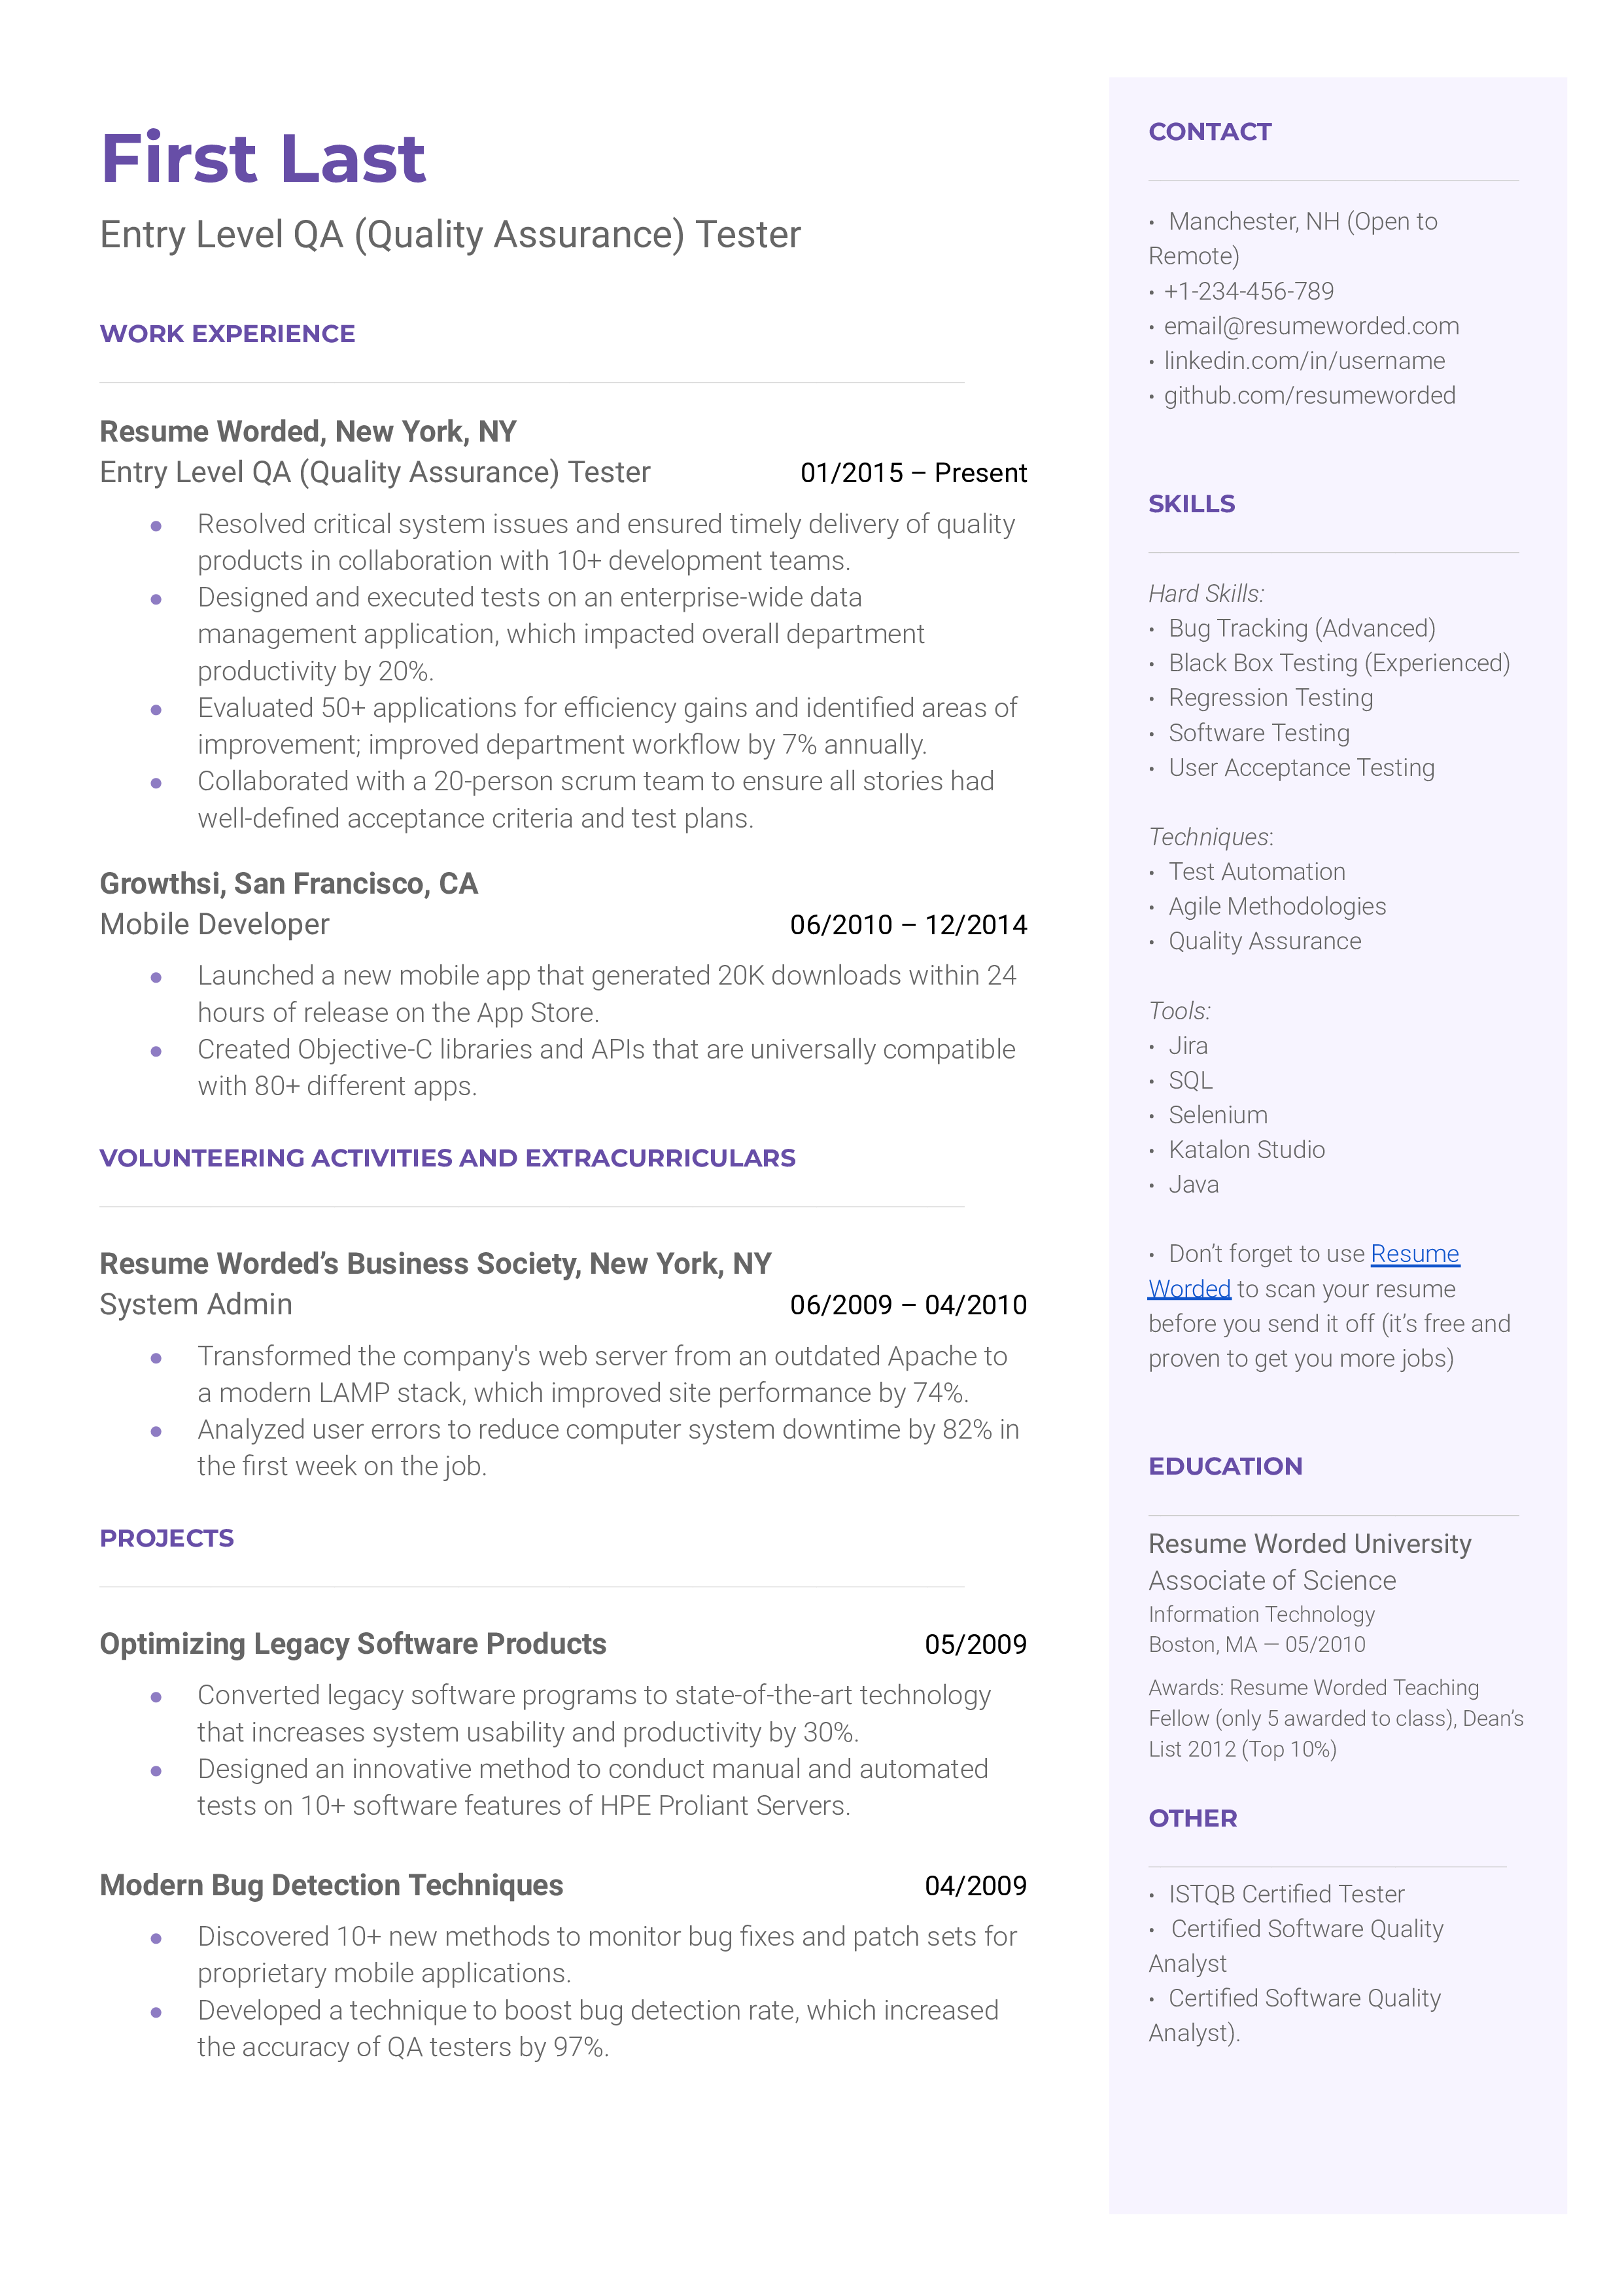 Entry-level QA tester resume with emphasis on testing methodologies and automation skills.